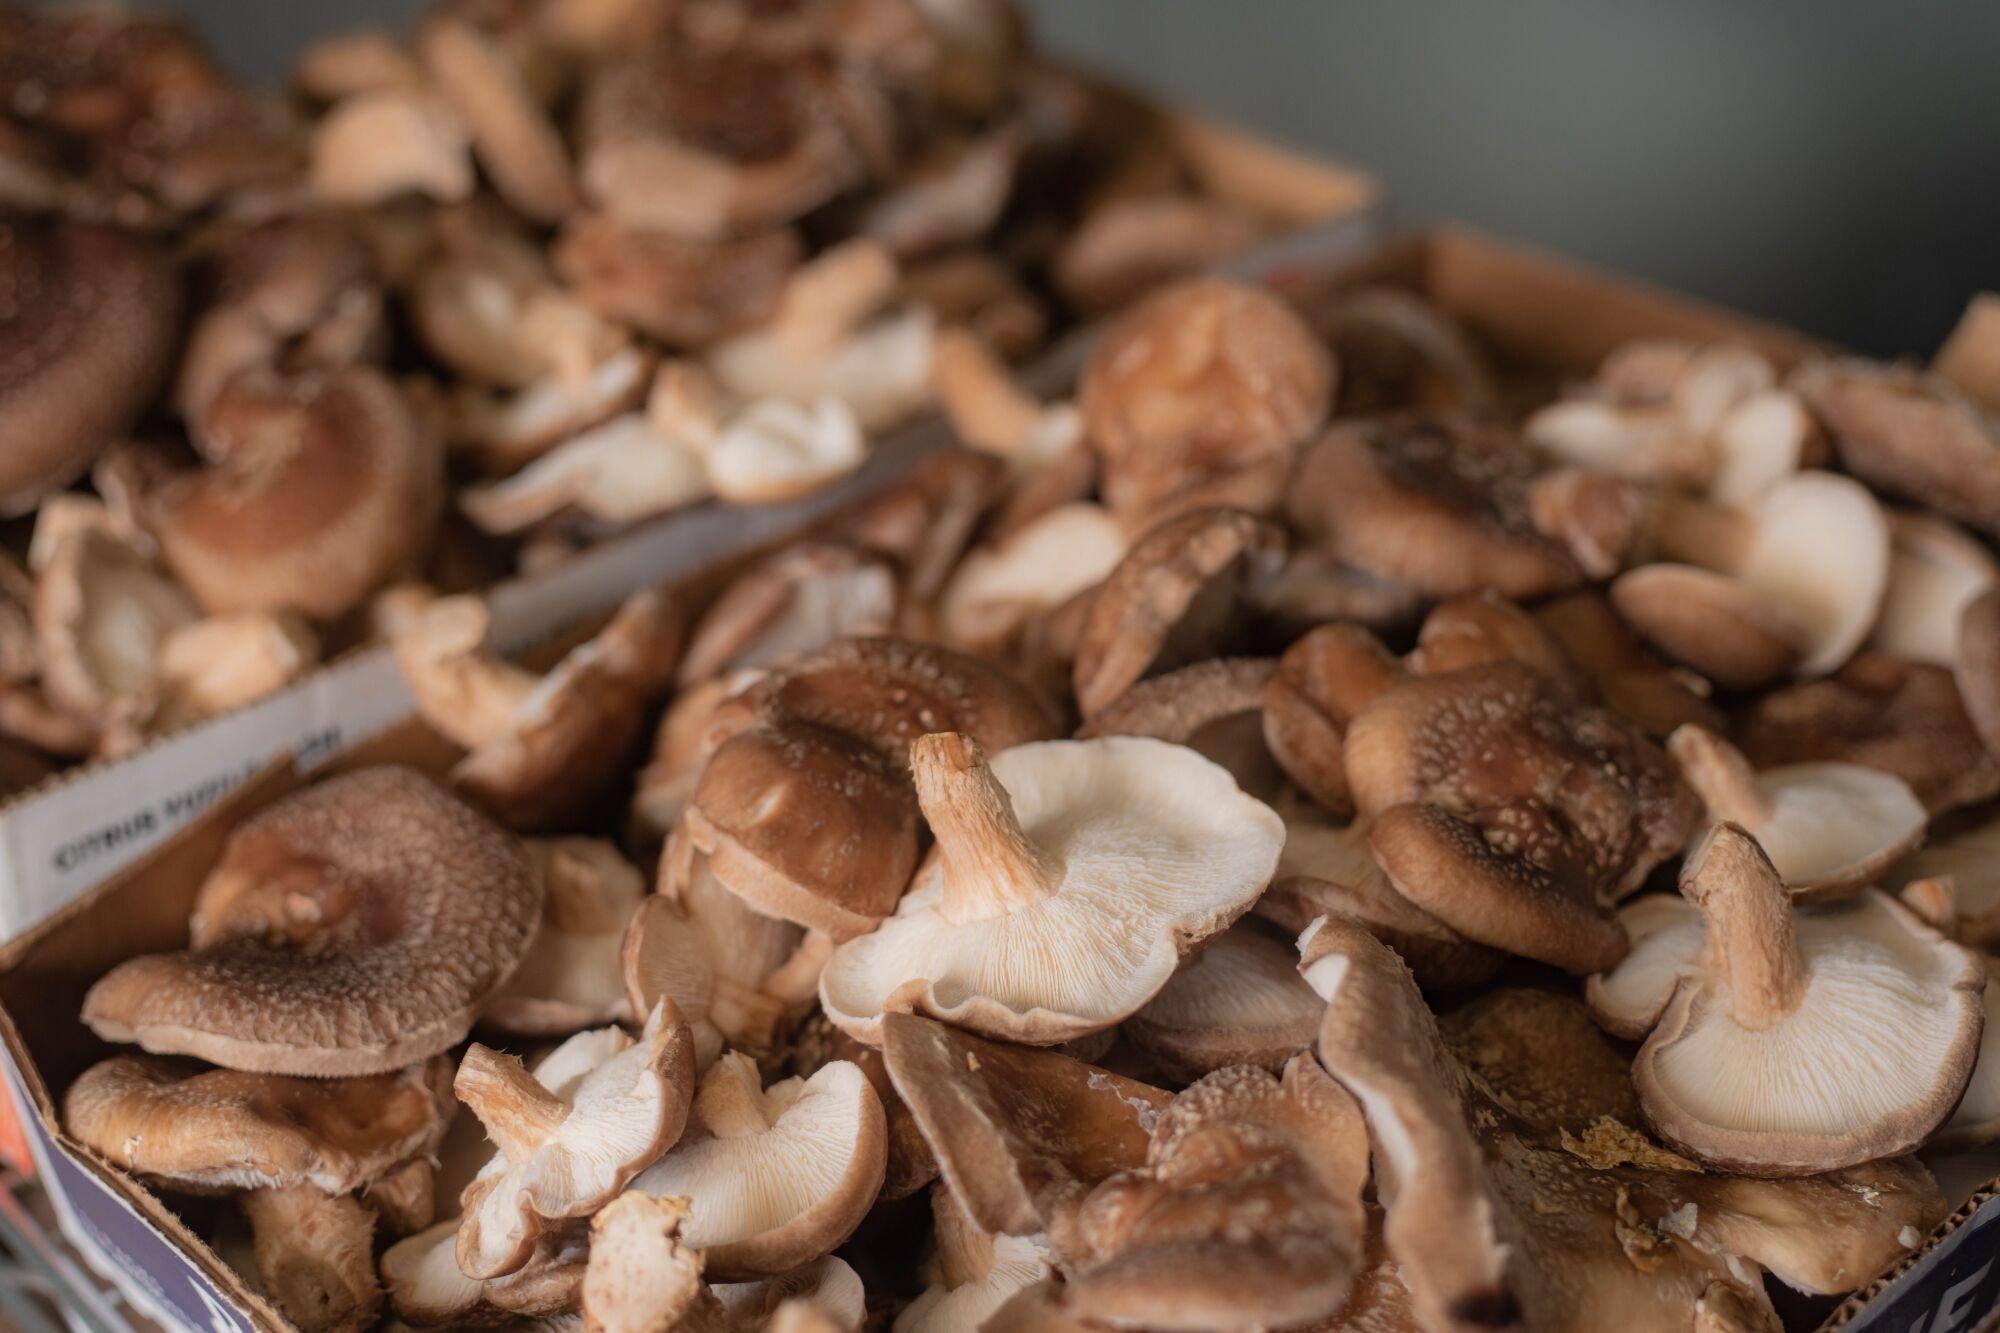 How to grow mushrooms at home - Los Angeles Times